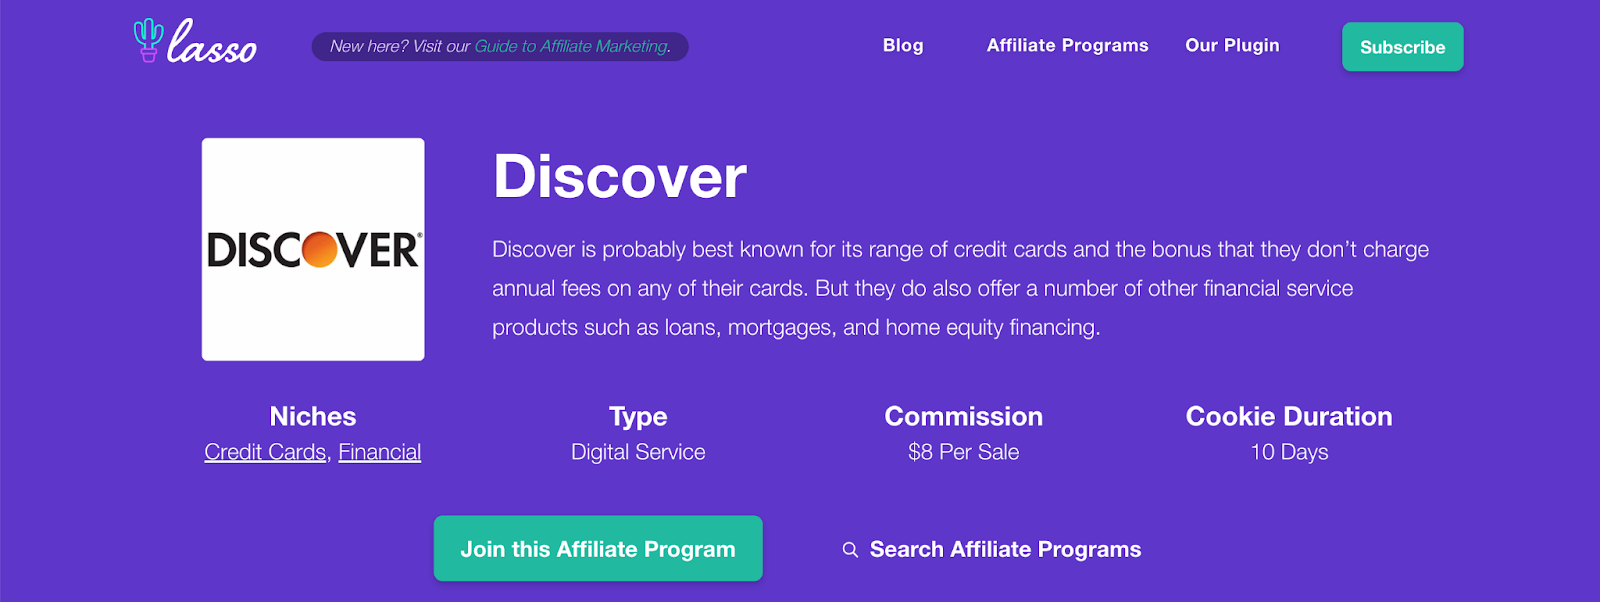 lasso affiliate program details page for discover banking